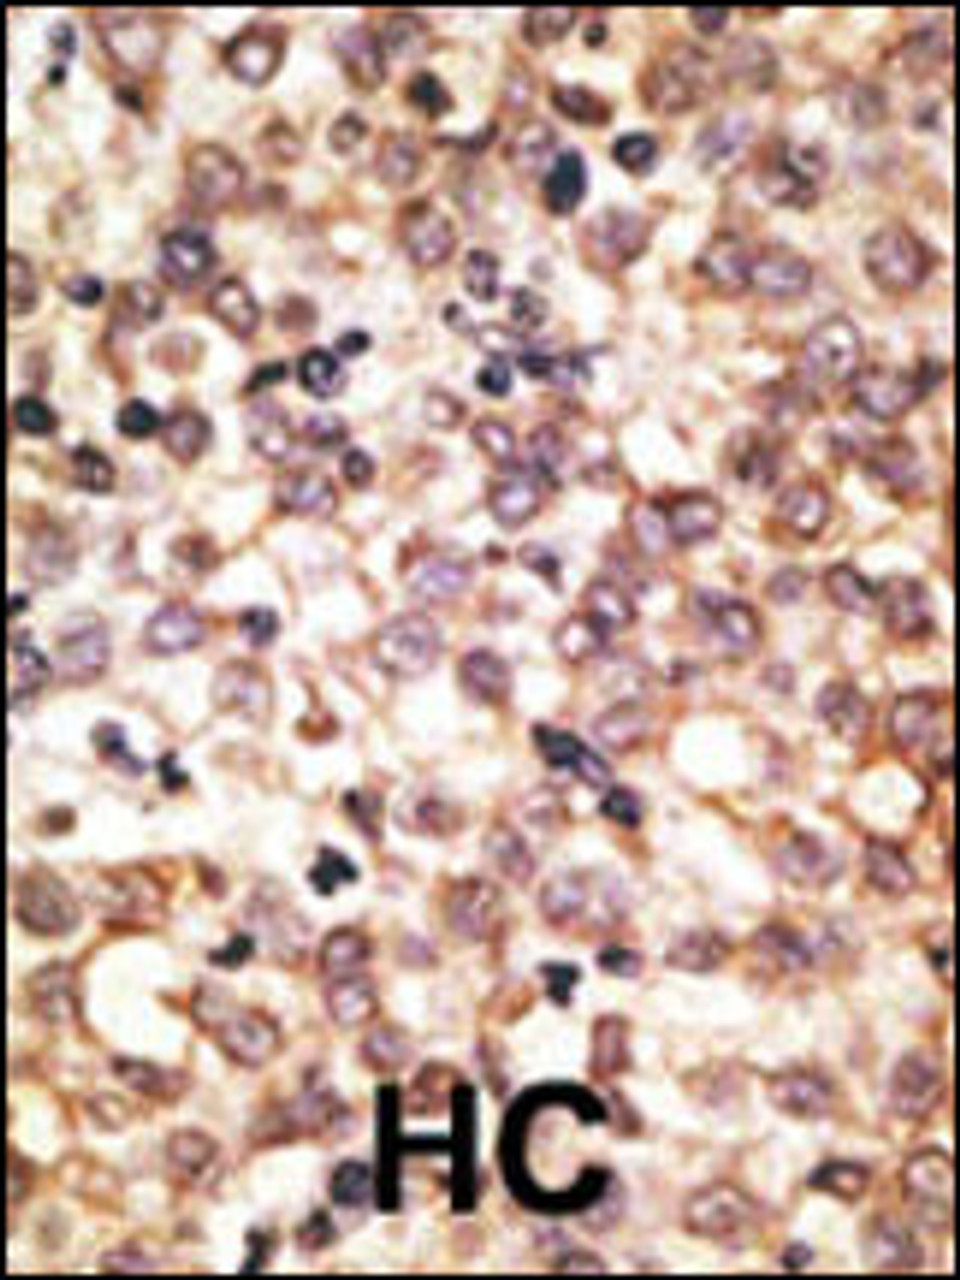 Formalin-fixed and paraffin-embedded human cancer tissue reacted with the primary antibody, which was peroxidase-conjugated to the secondary antibody, followed by AEC staining. BC = breast carcinoma; HC = hepatocarcinoma.